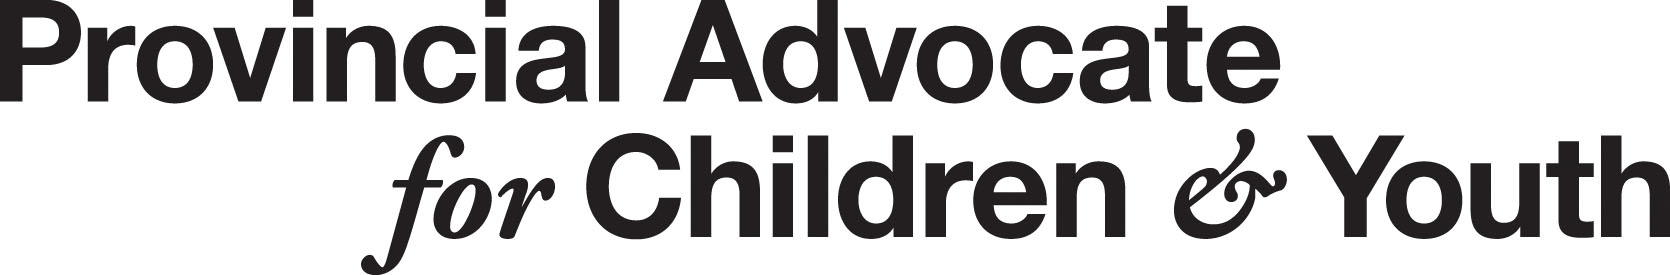 Office of the Provincial Advocate for Children and Youth